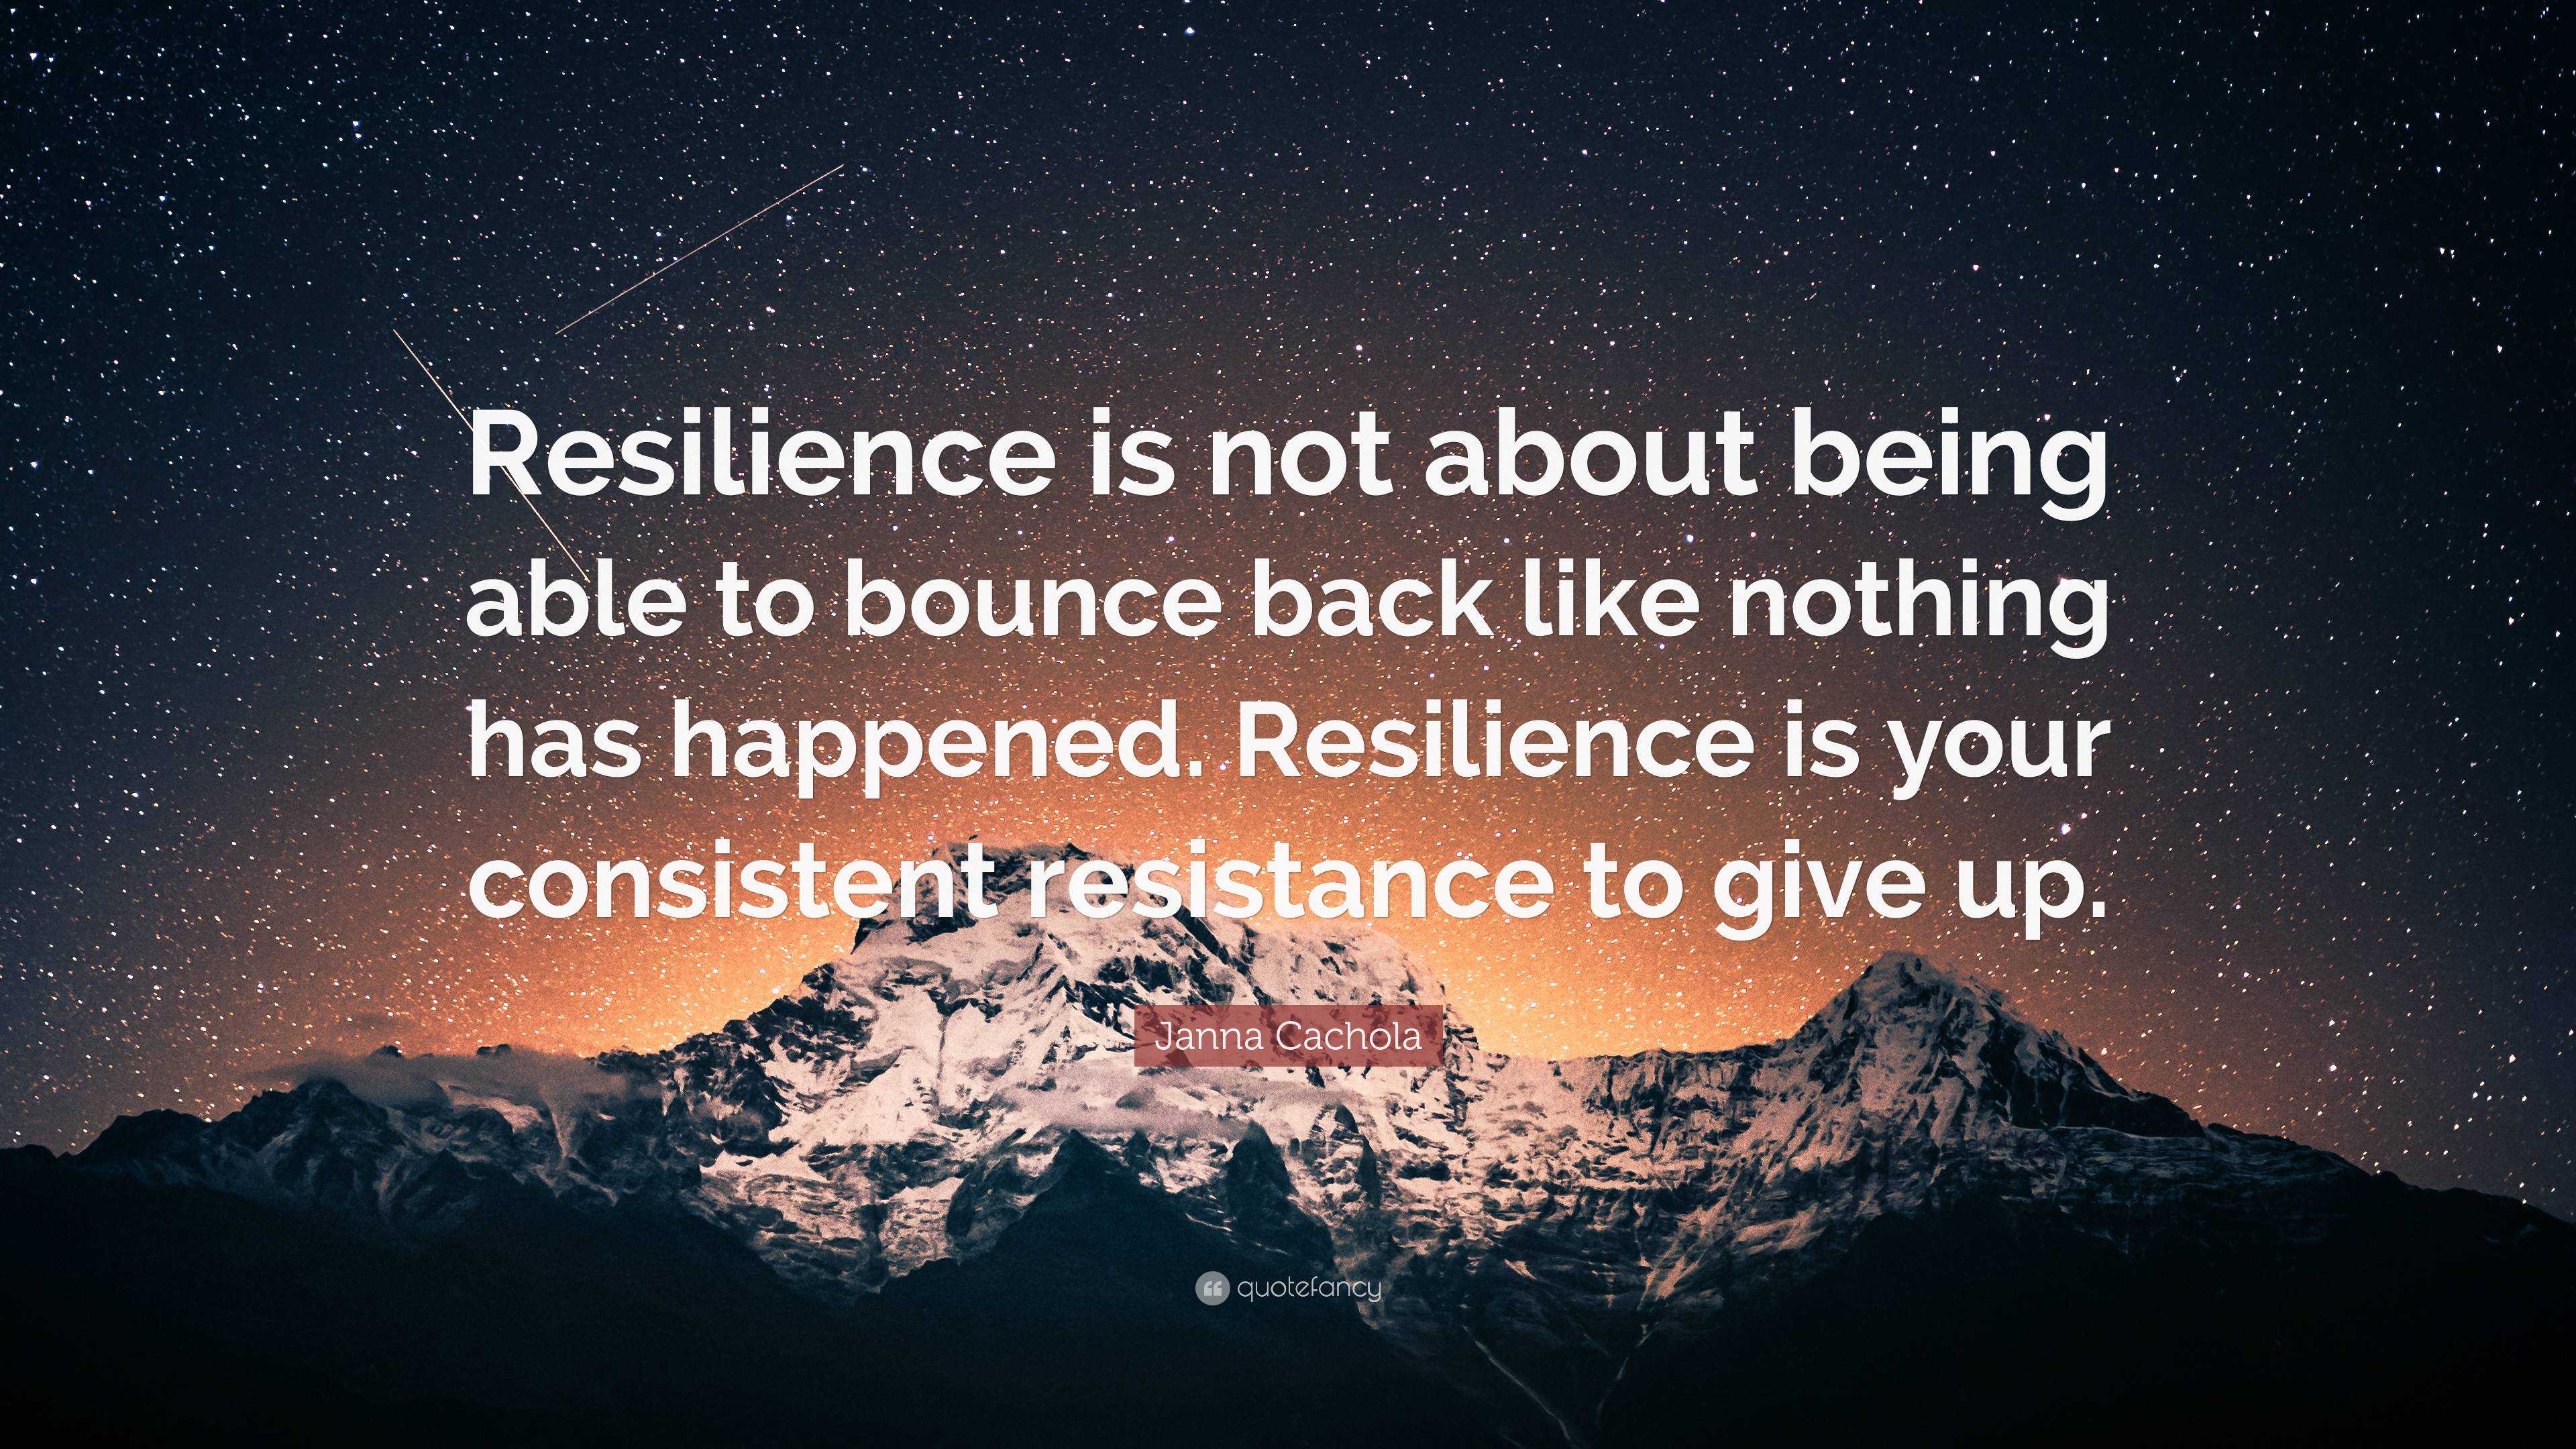 Janna Cachola Quote: “Resilience is not about being able to bounce back ...